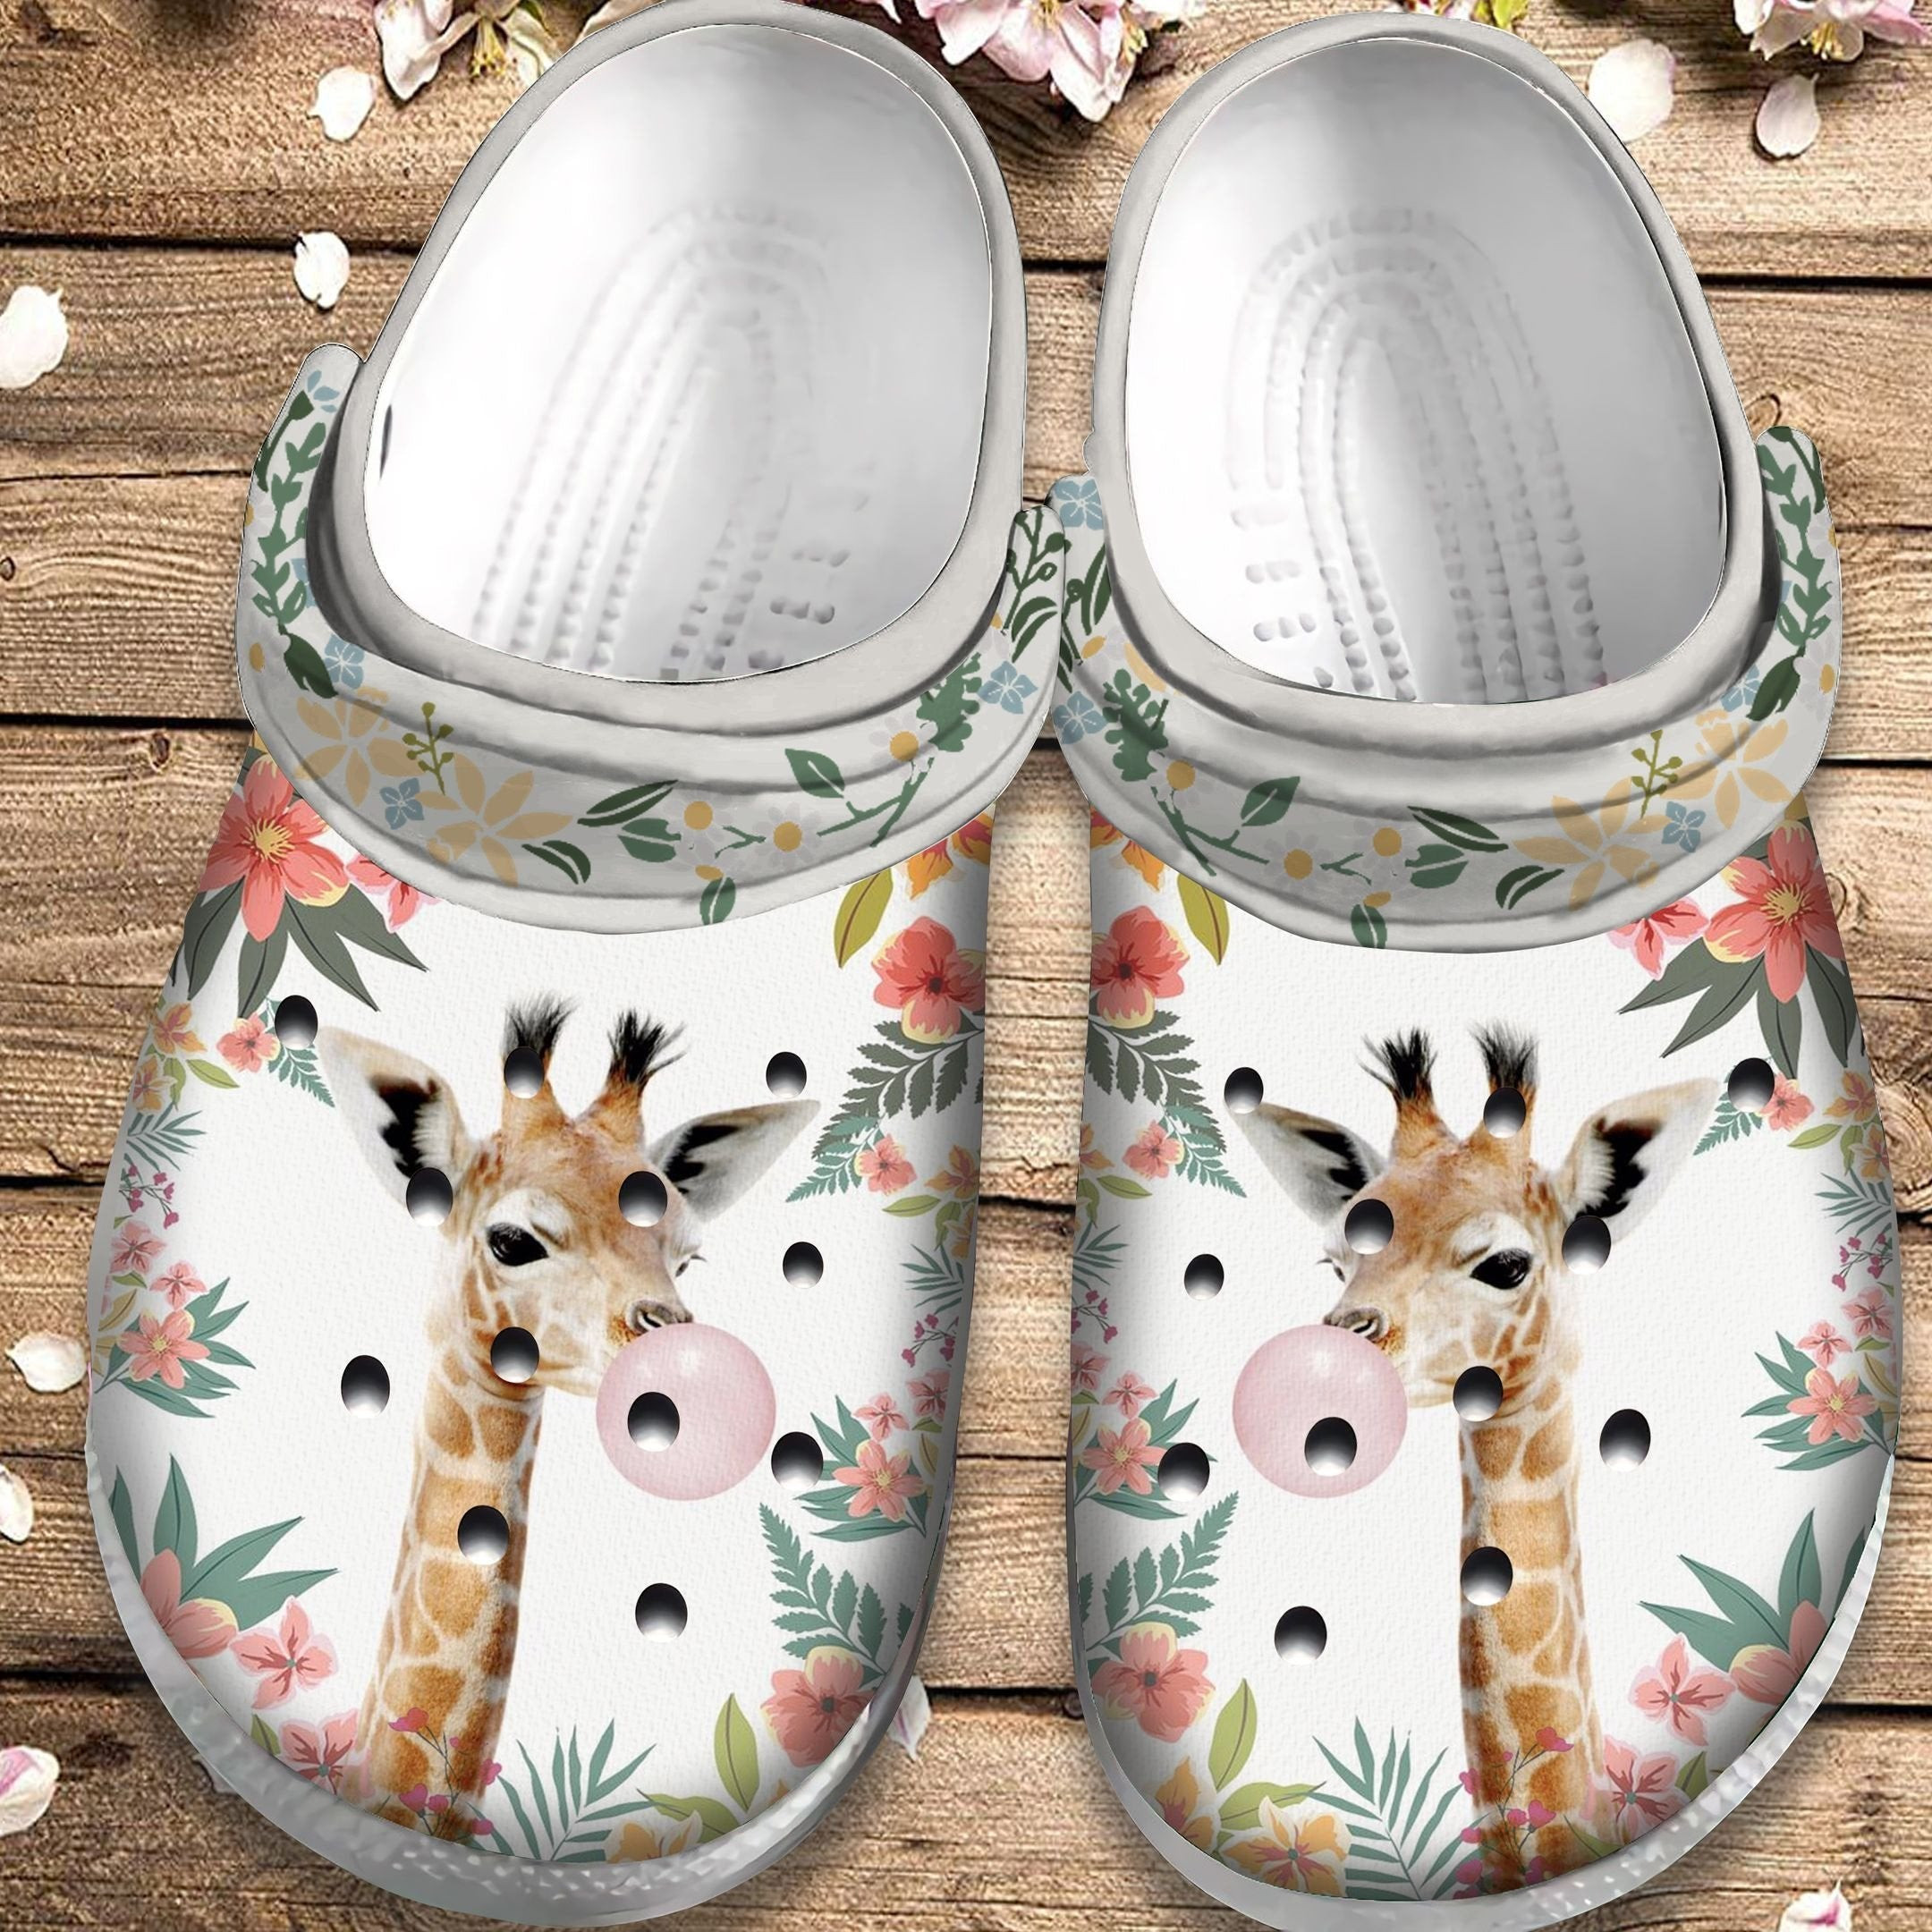 Giraffe With Bubble Gum Shoes Lovely Garden Crocs Clogs Birthday Gift